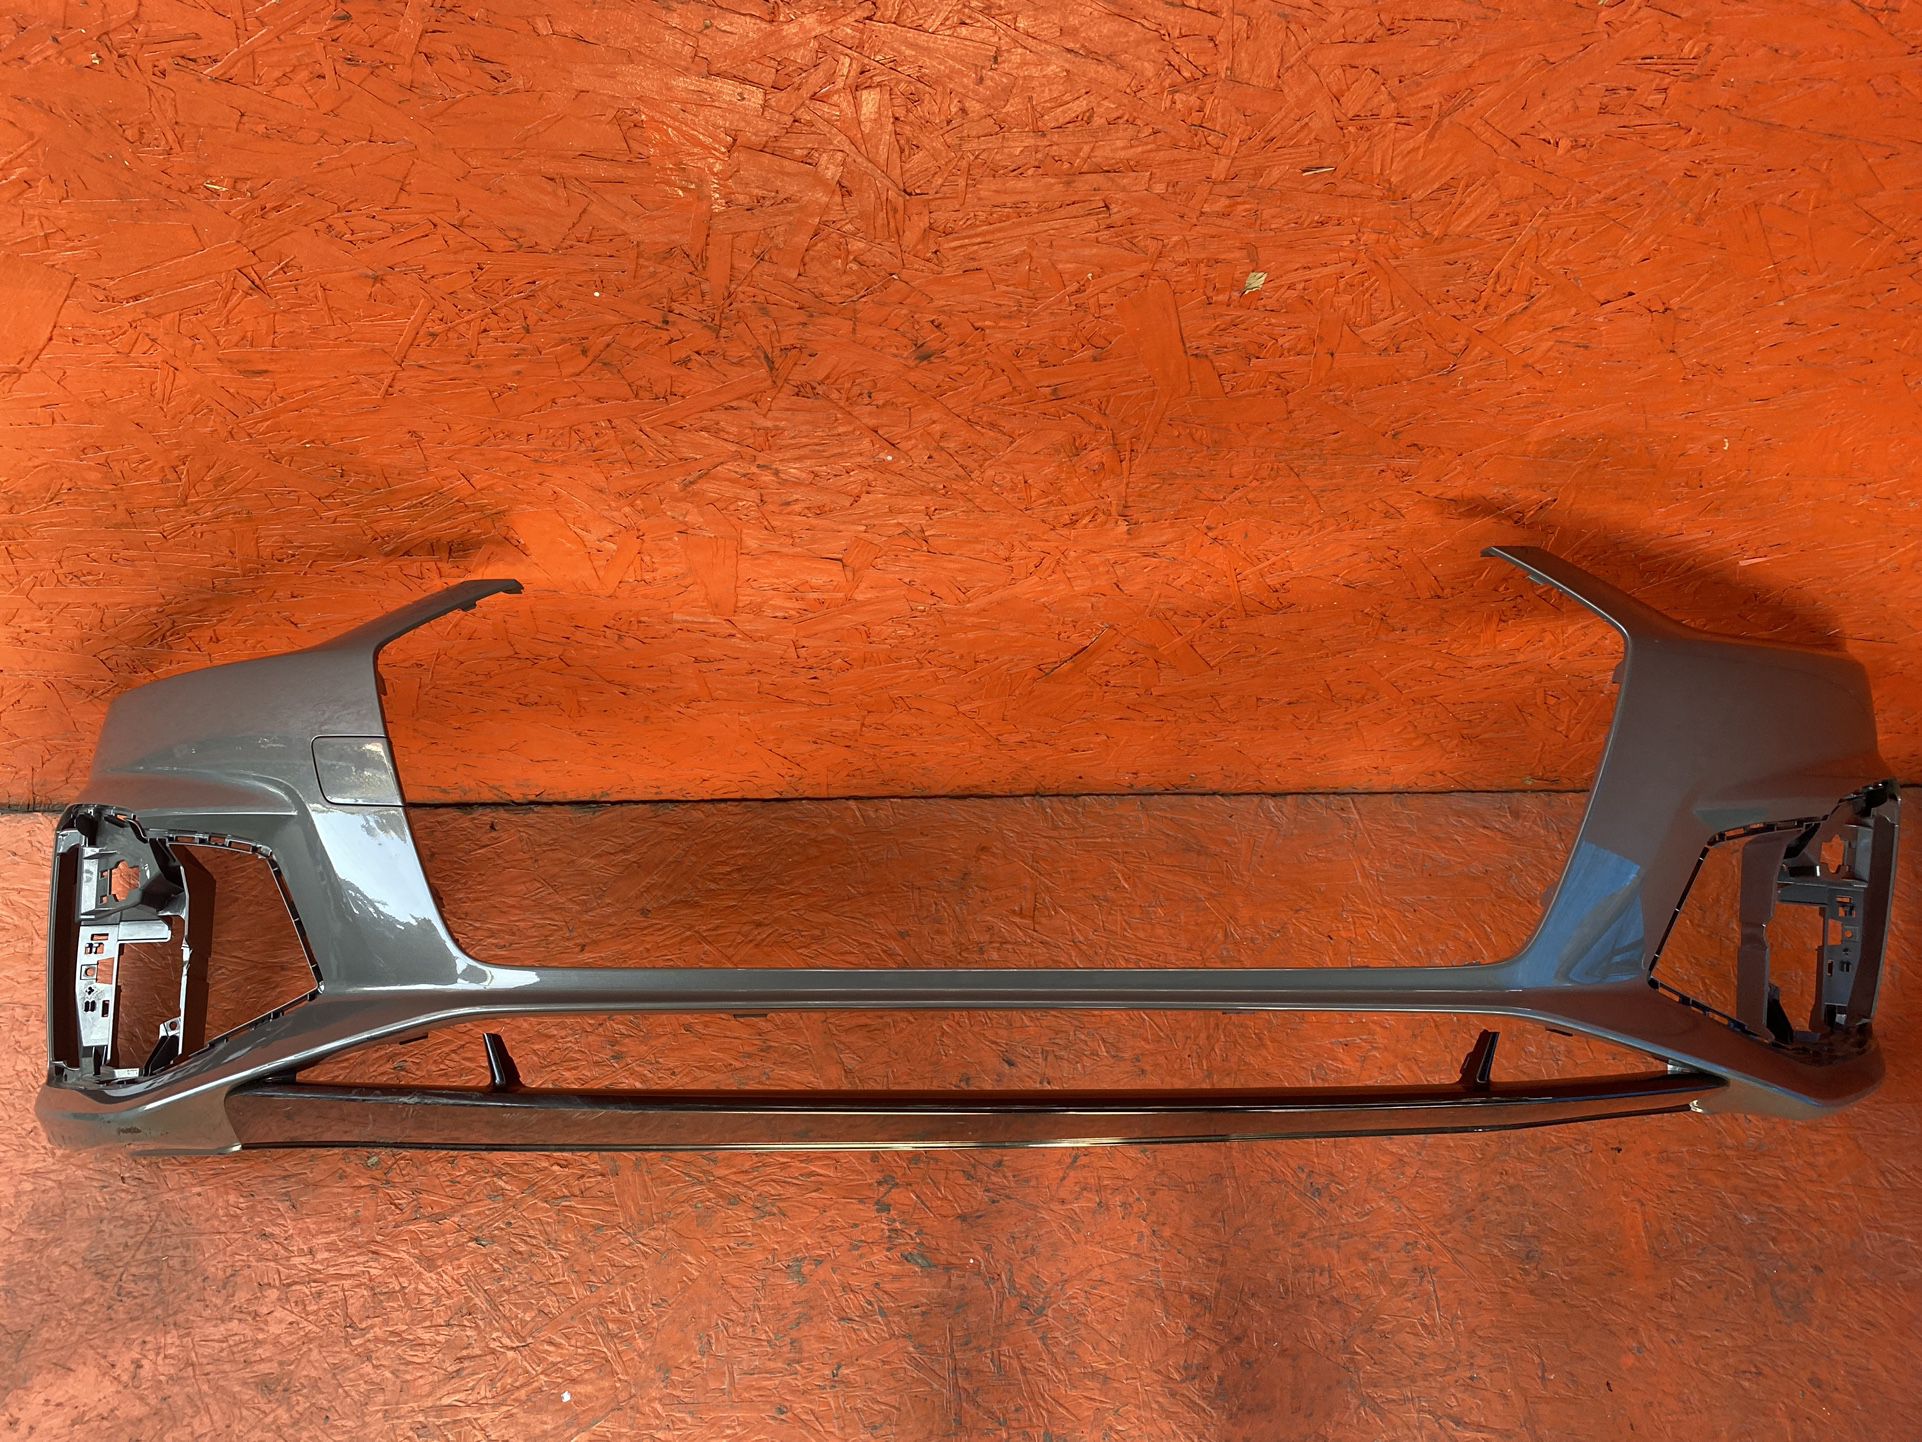 2020 2021 2022 AUDI A5 S-LINE FRONT BUMPER COVER OEM 8W(contact info removed)A